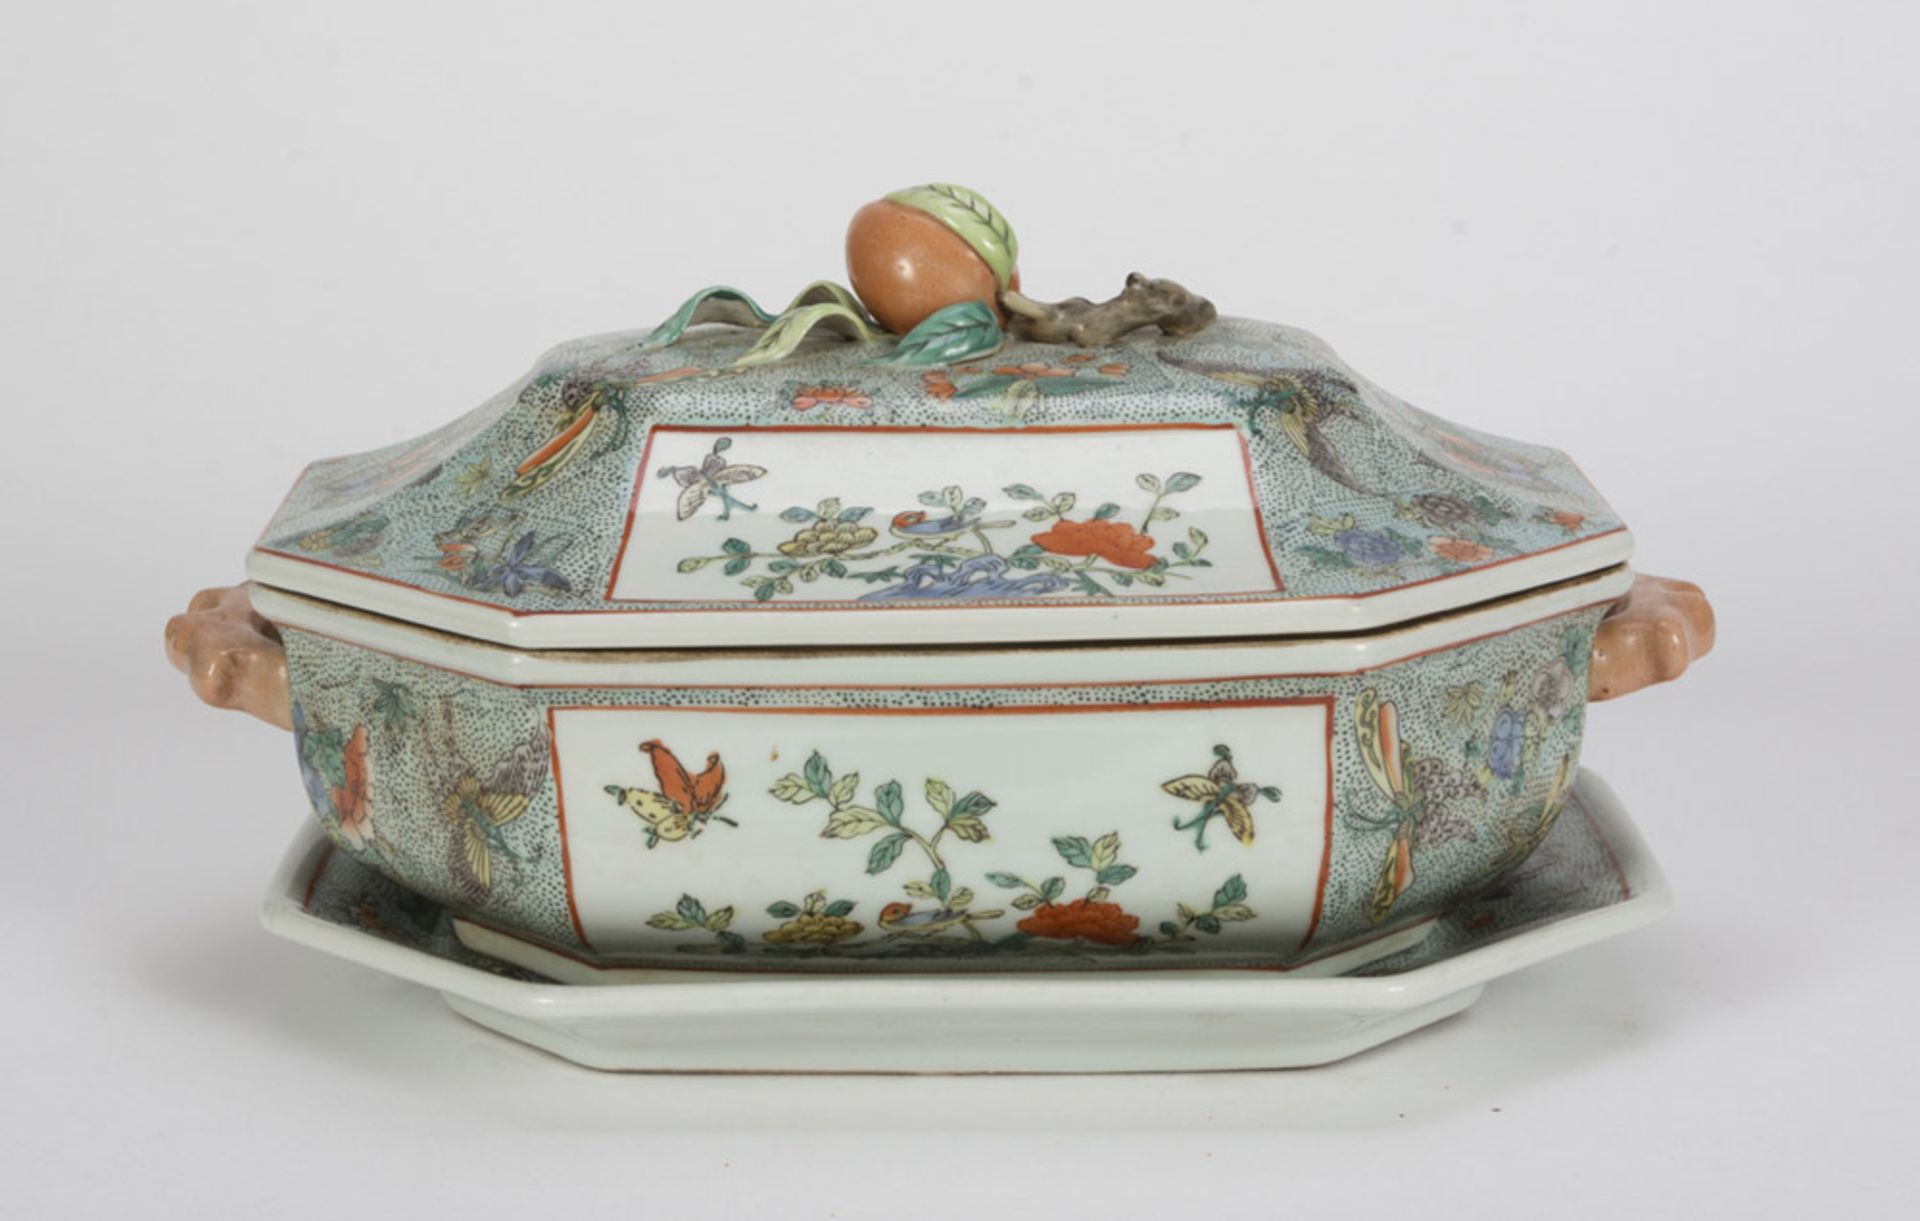 LARGE PORCELAIN TUREEN WITH TRAY IN POLYCHROME ENAMEL, CHINA, 20TH CENTURY